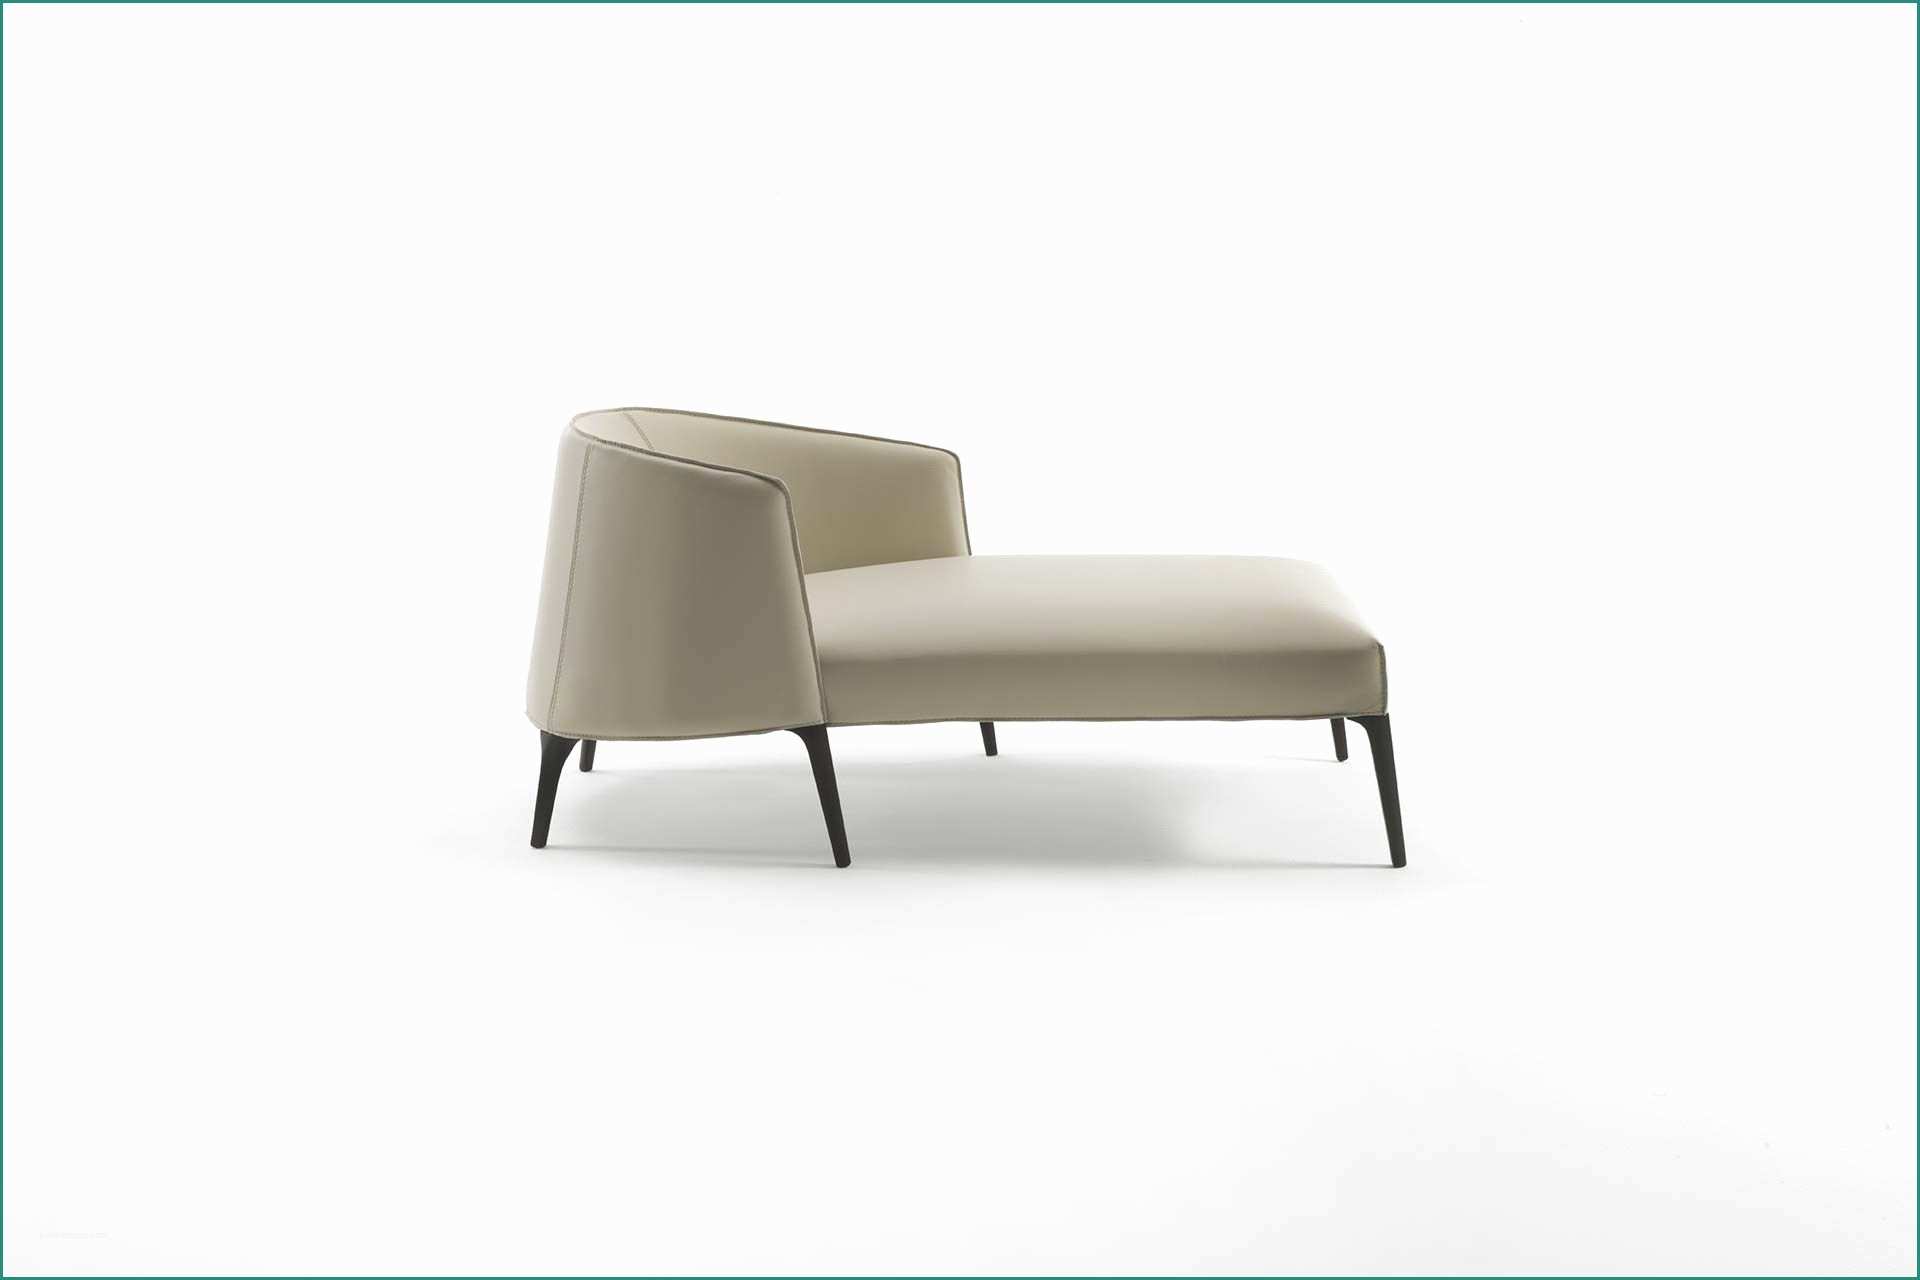 Divano Letto Chaise Longue E Upholstered Leather Day Bed Jackie Longue by Frigerio Poltrone E